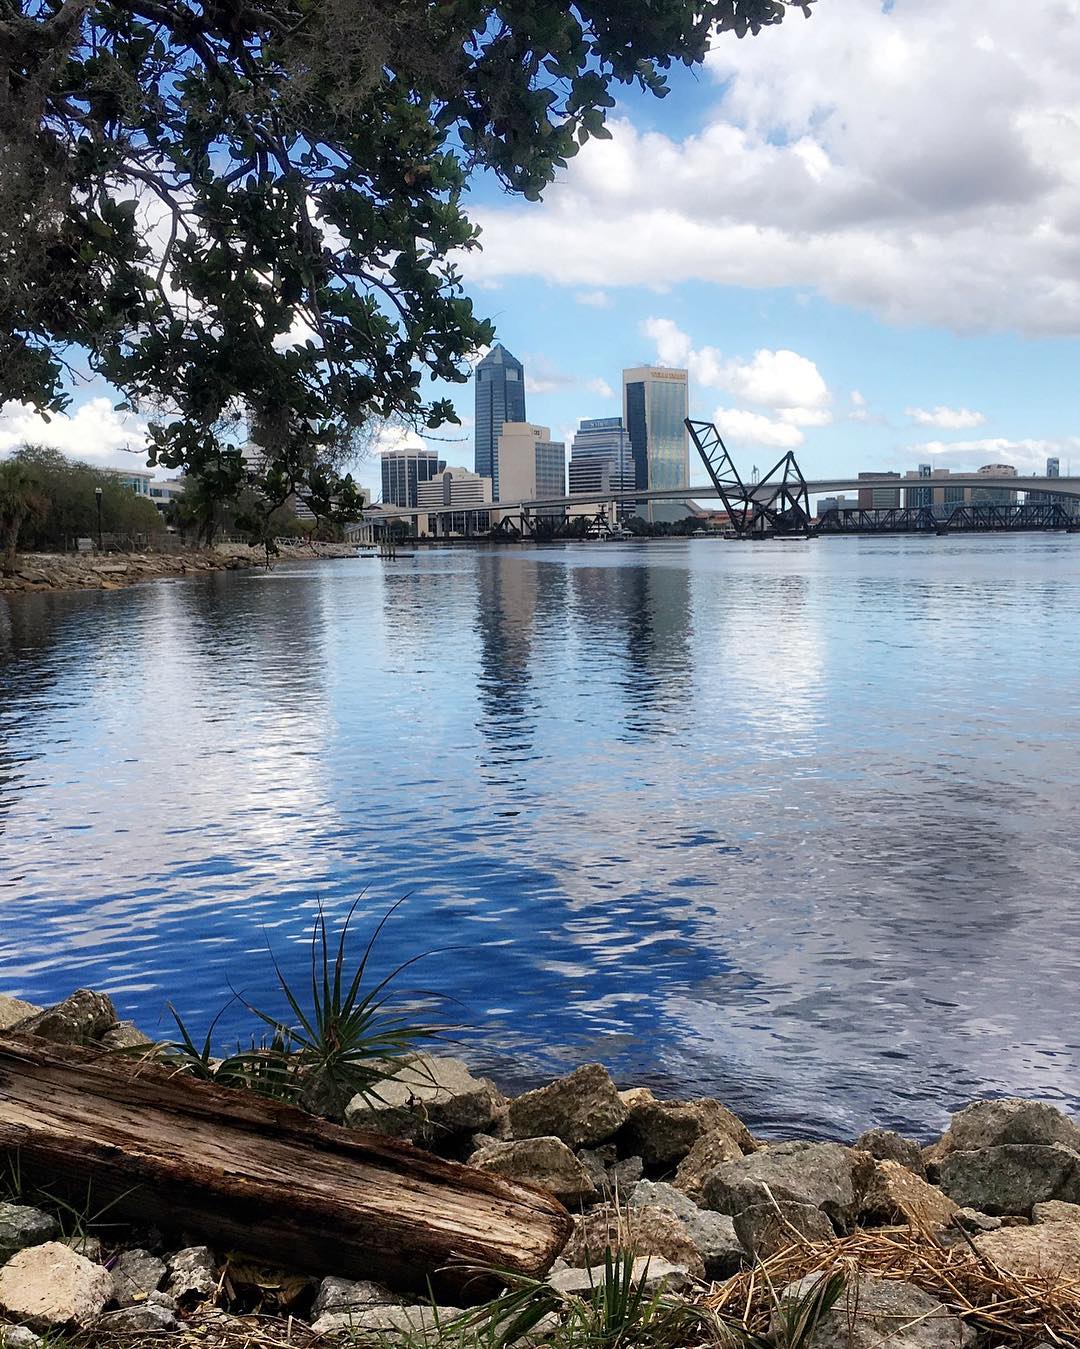 skyline of downtown jacksonville, FL from across the river